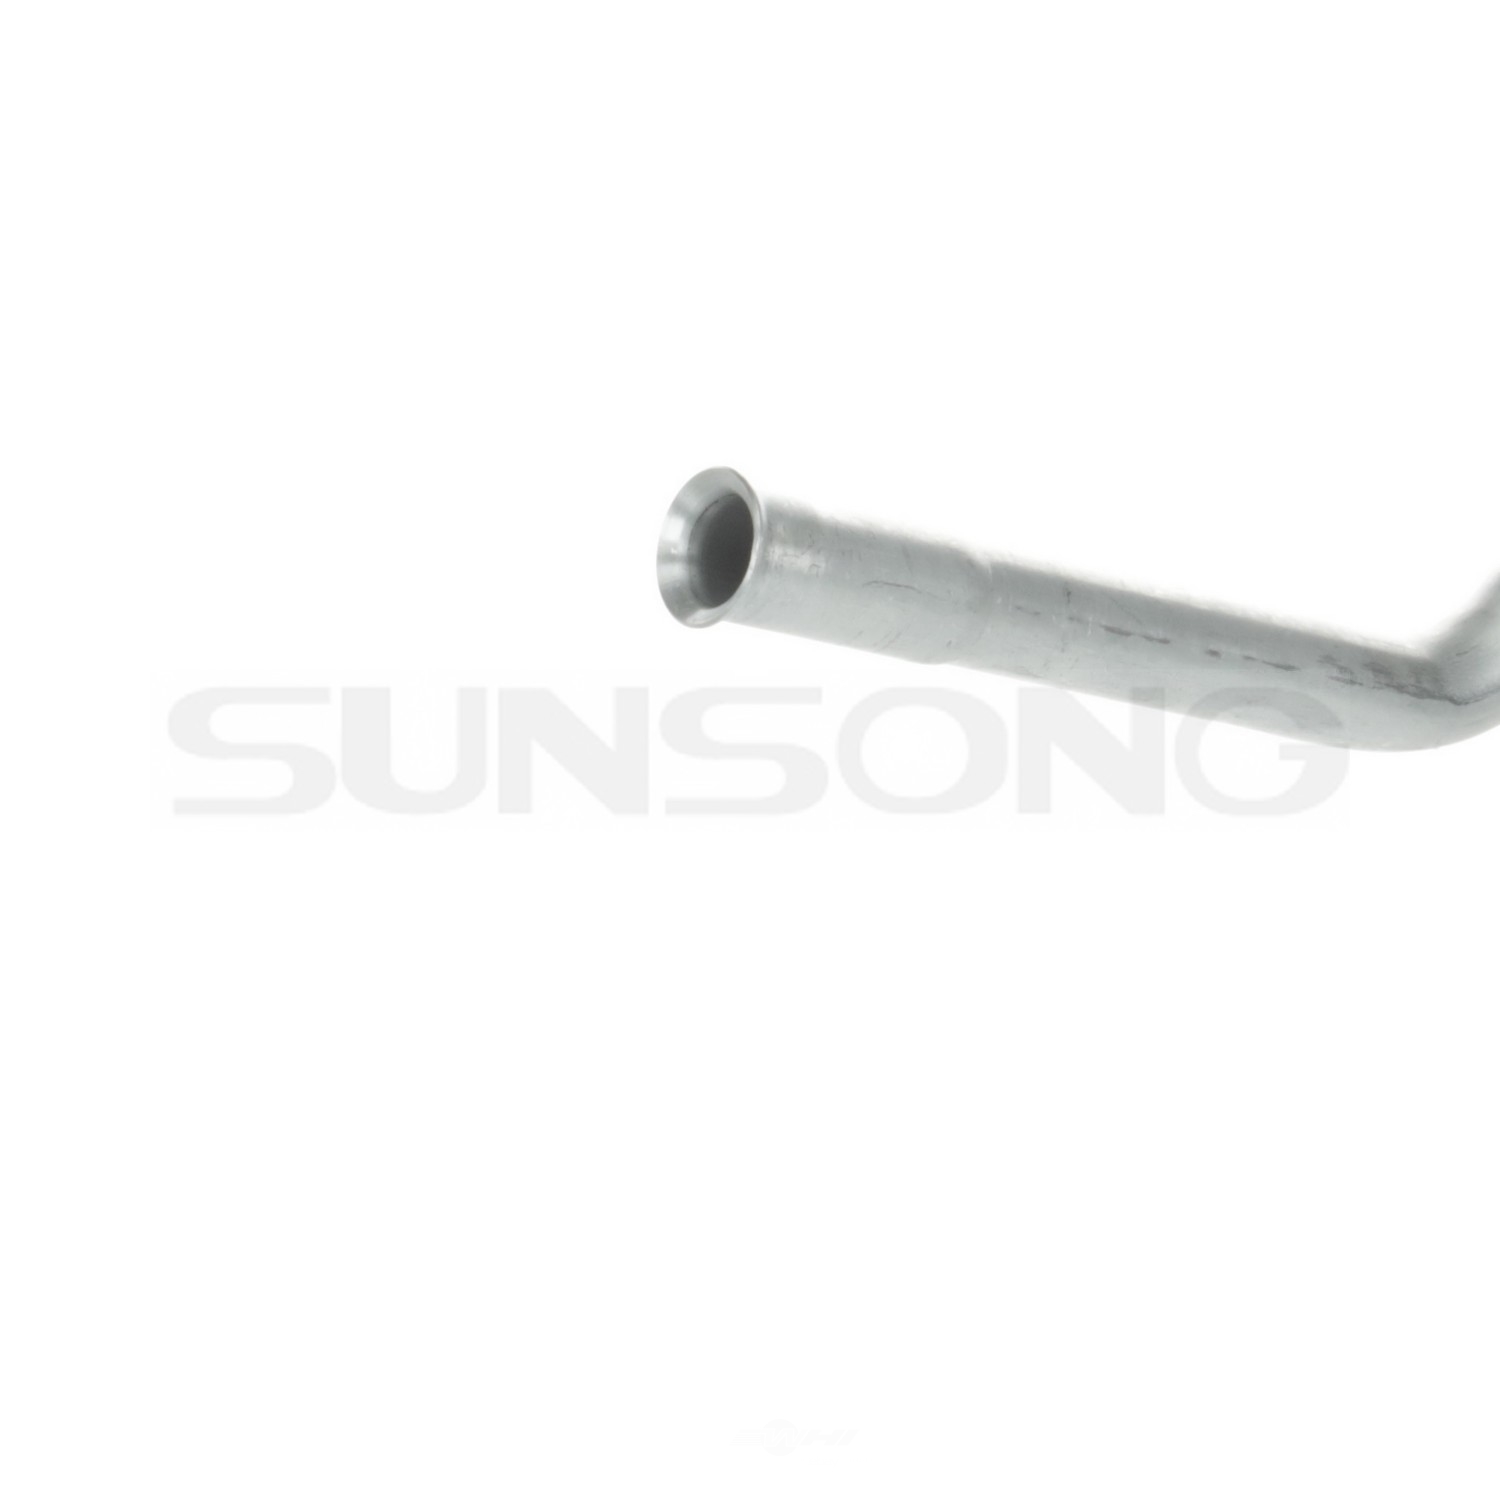 SUNSONG NORTH AMERICA - A/C Refrigerant Discharge / Suction Hose Assembly - SUG 5203004